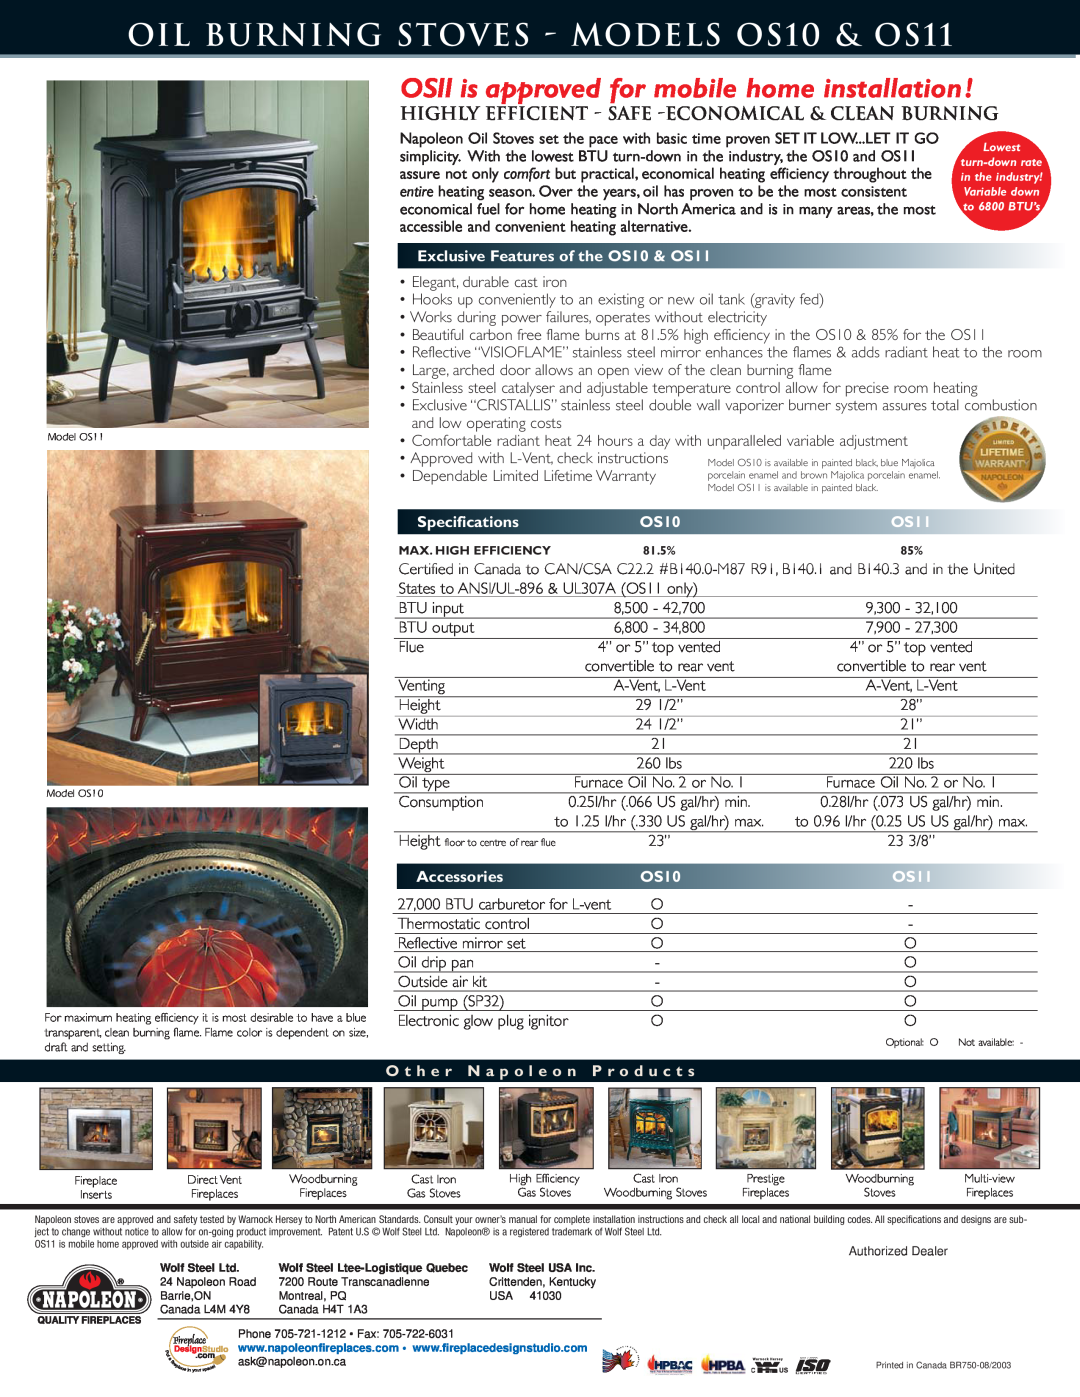 Napoleon Fireplaces OIL BURNING STOVES - MODELS OS10 & OS11, Exclusive Features of the OS10 & OS11, Specifications 